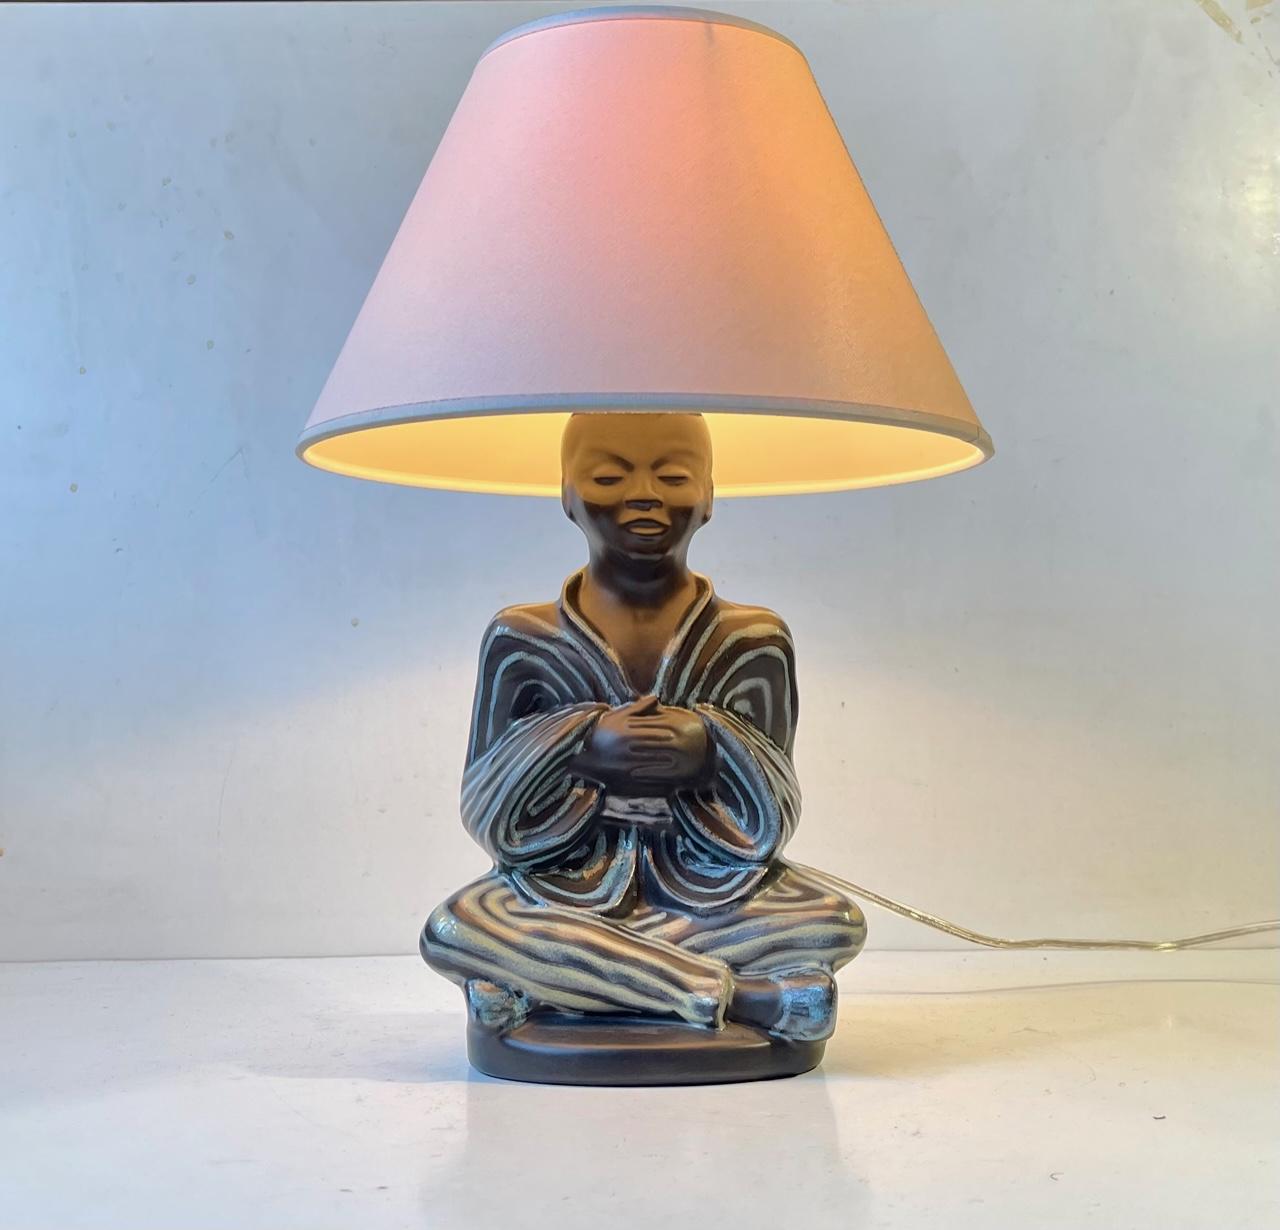 A very rare table lamp made at Søholm in Denmark during the early 1960s. Decorated with pastel blue, yellow and white glazes on a satin black main.glaze. A similar technique used in the Burgundia series by Svend Aage Holm-Sørensen and Svend Aage